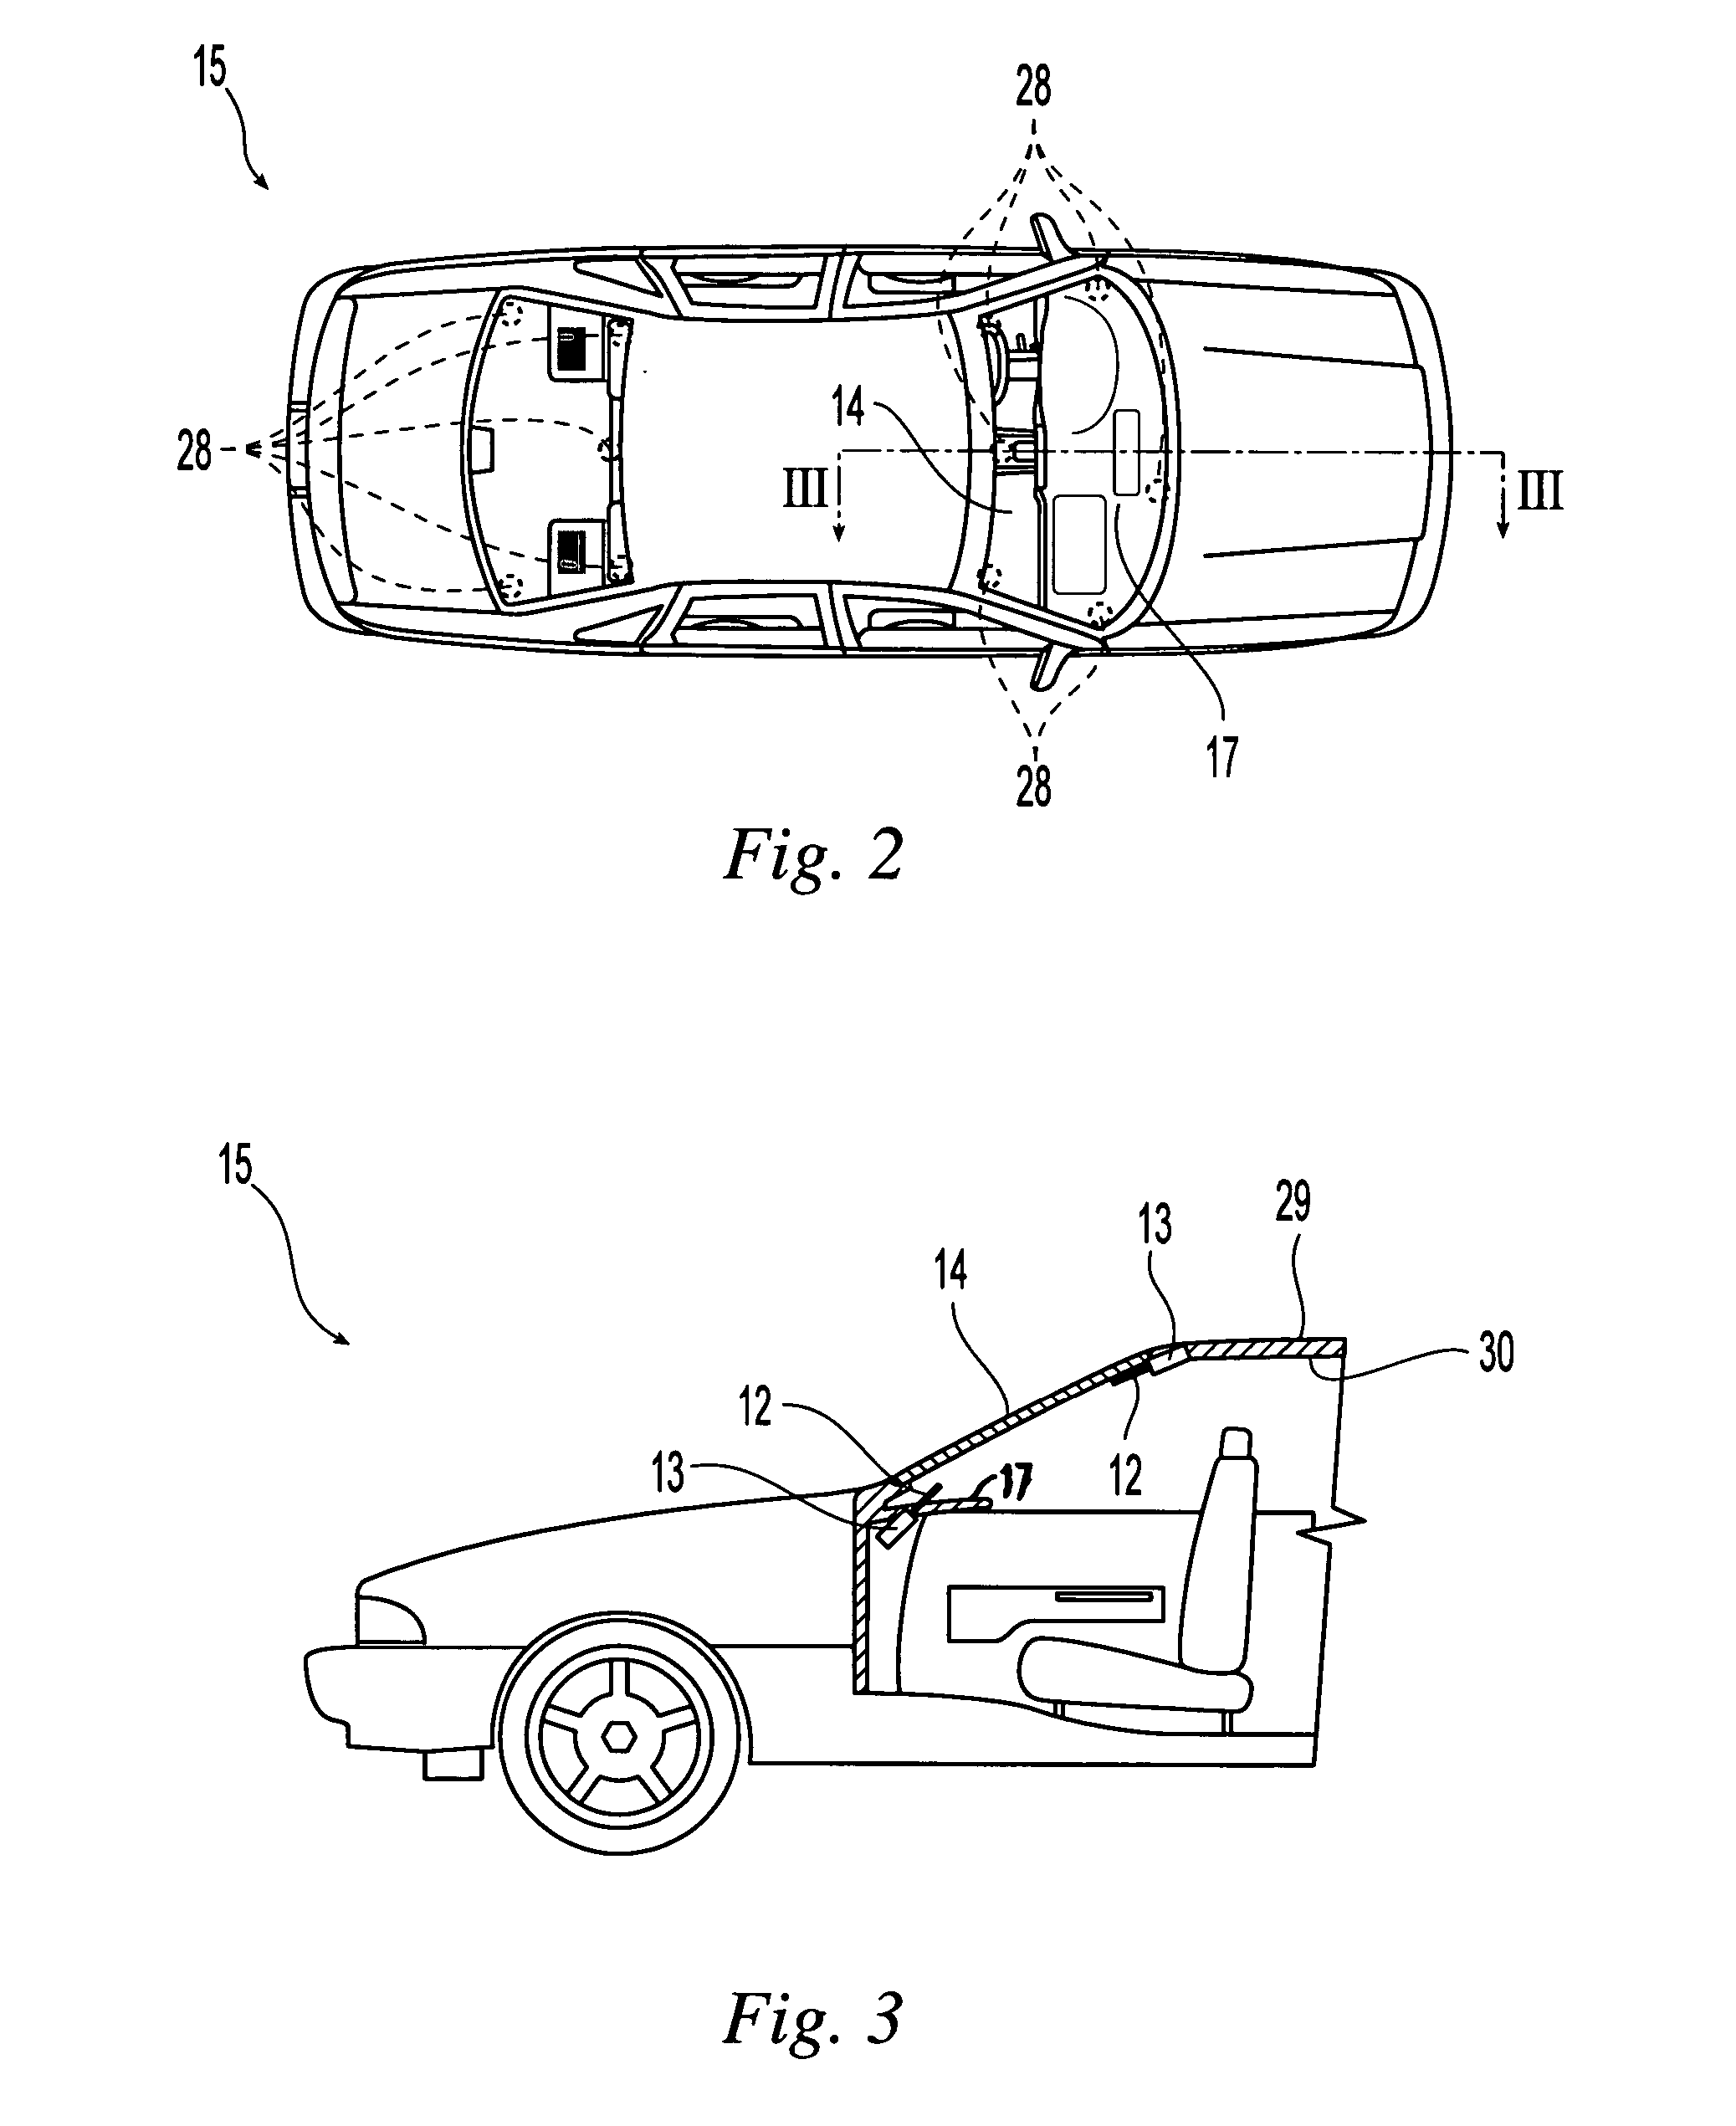 Motor vehicle decal display system